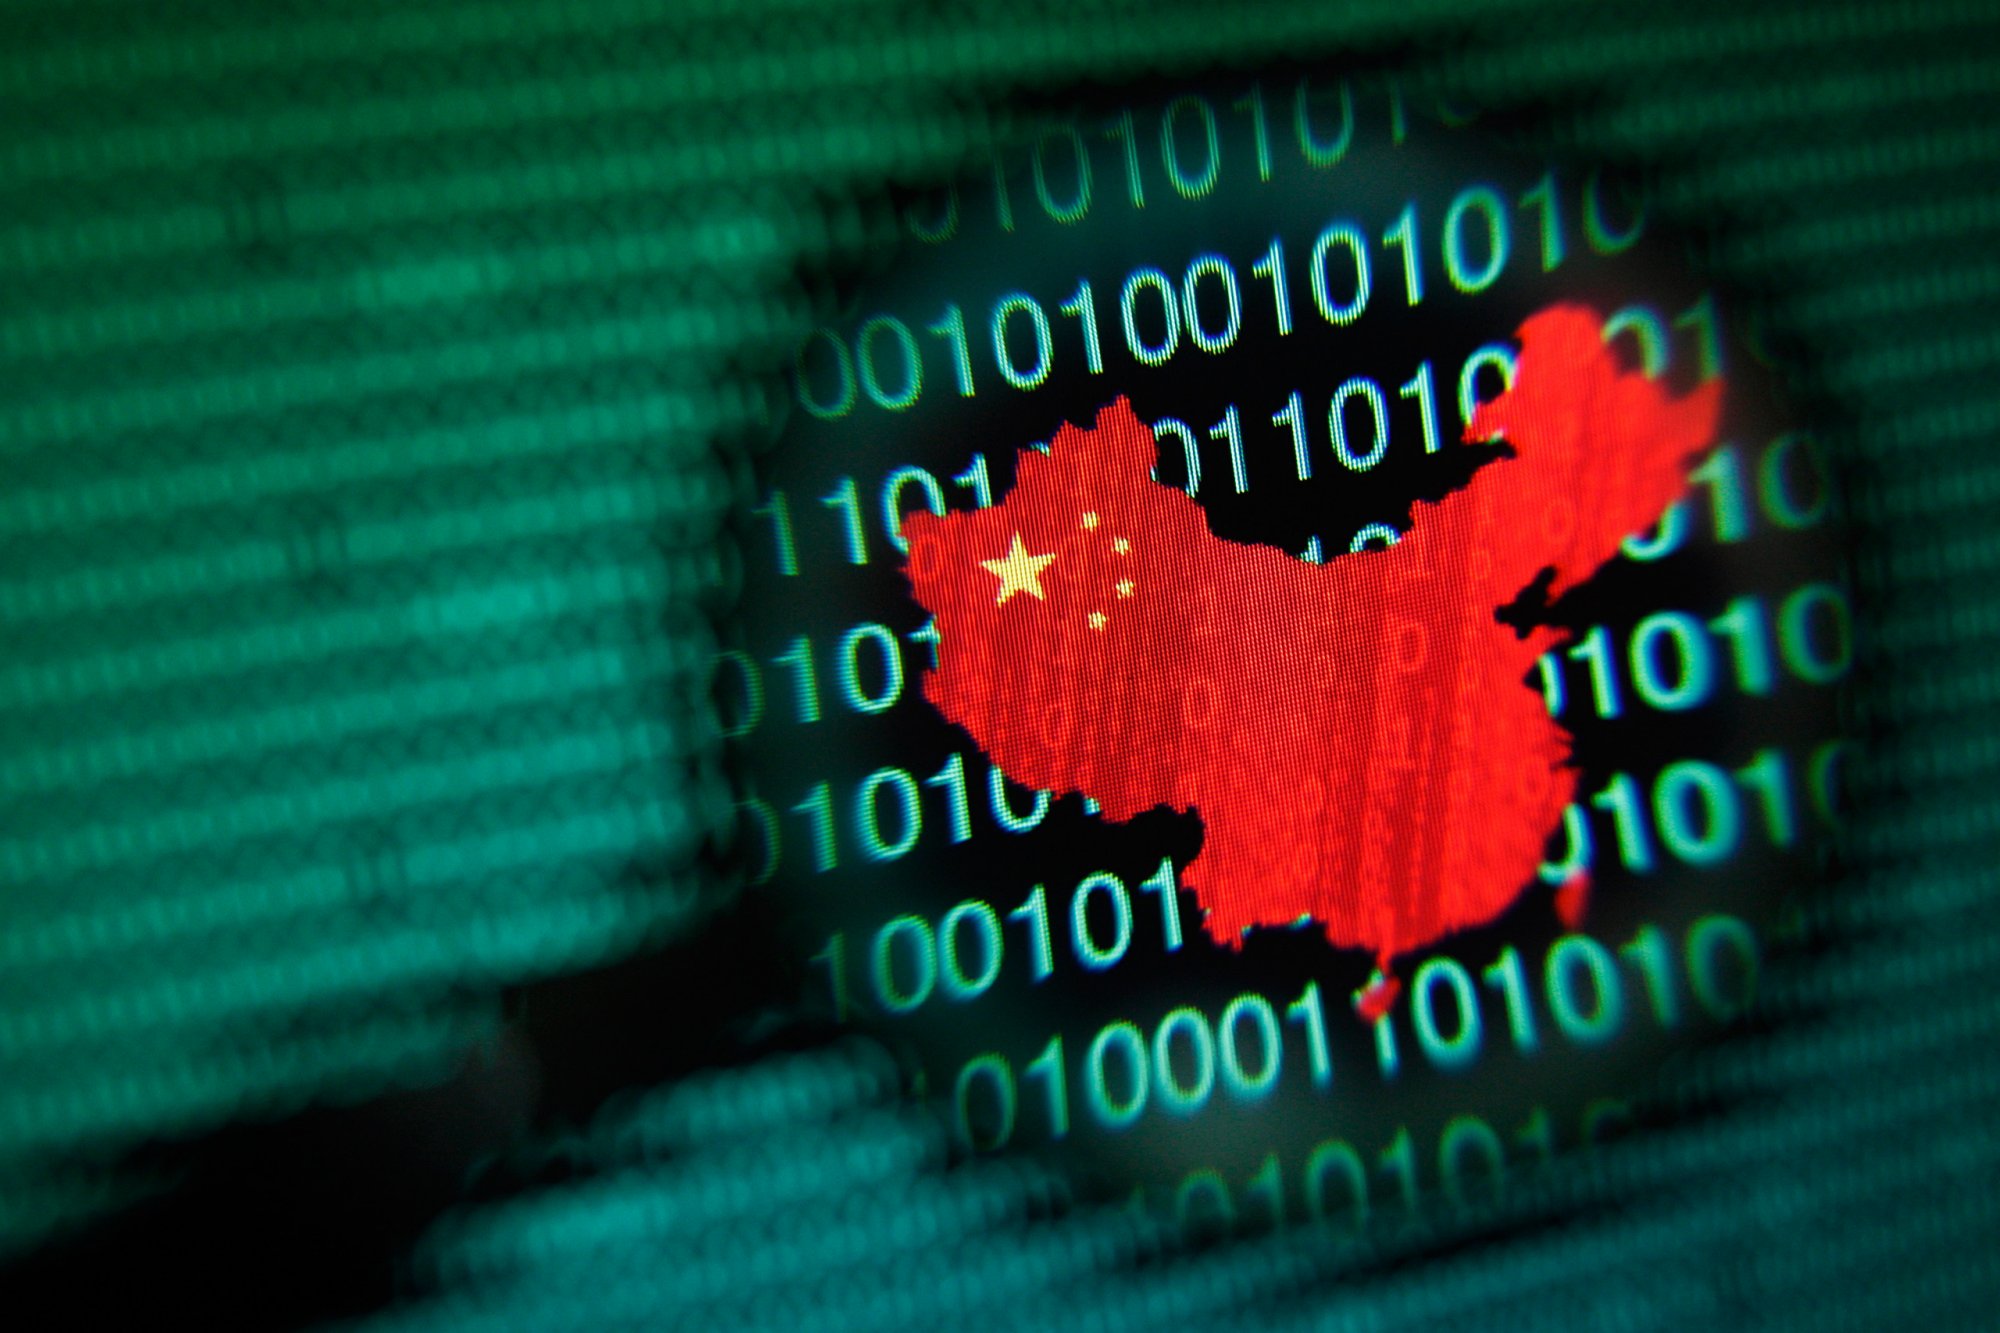 Image: US and allies condemn China for massive cyberattack against Microsoft email servers